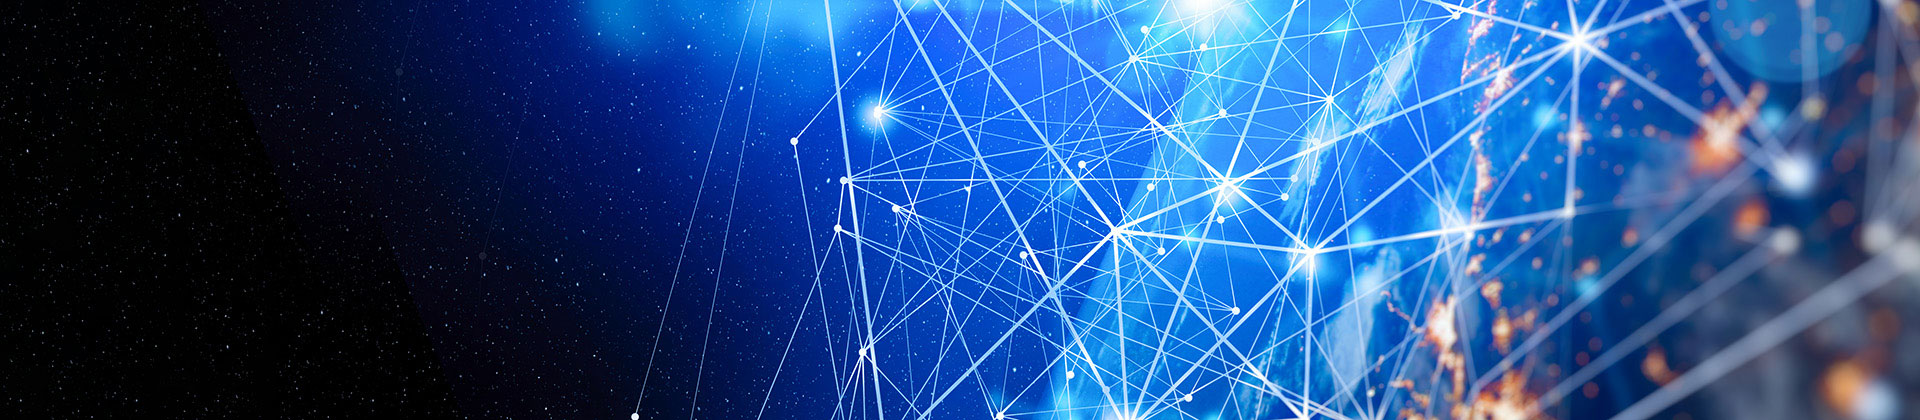 Digital network of connections lit up